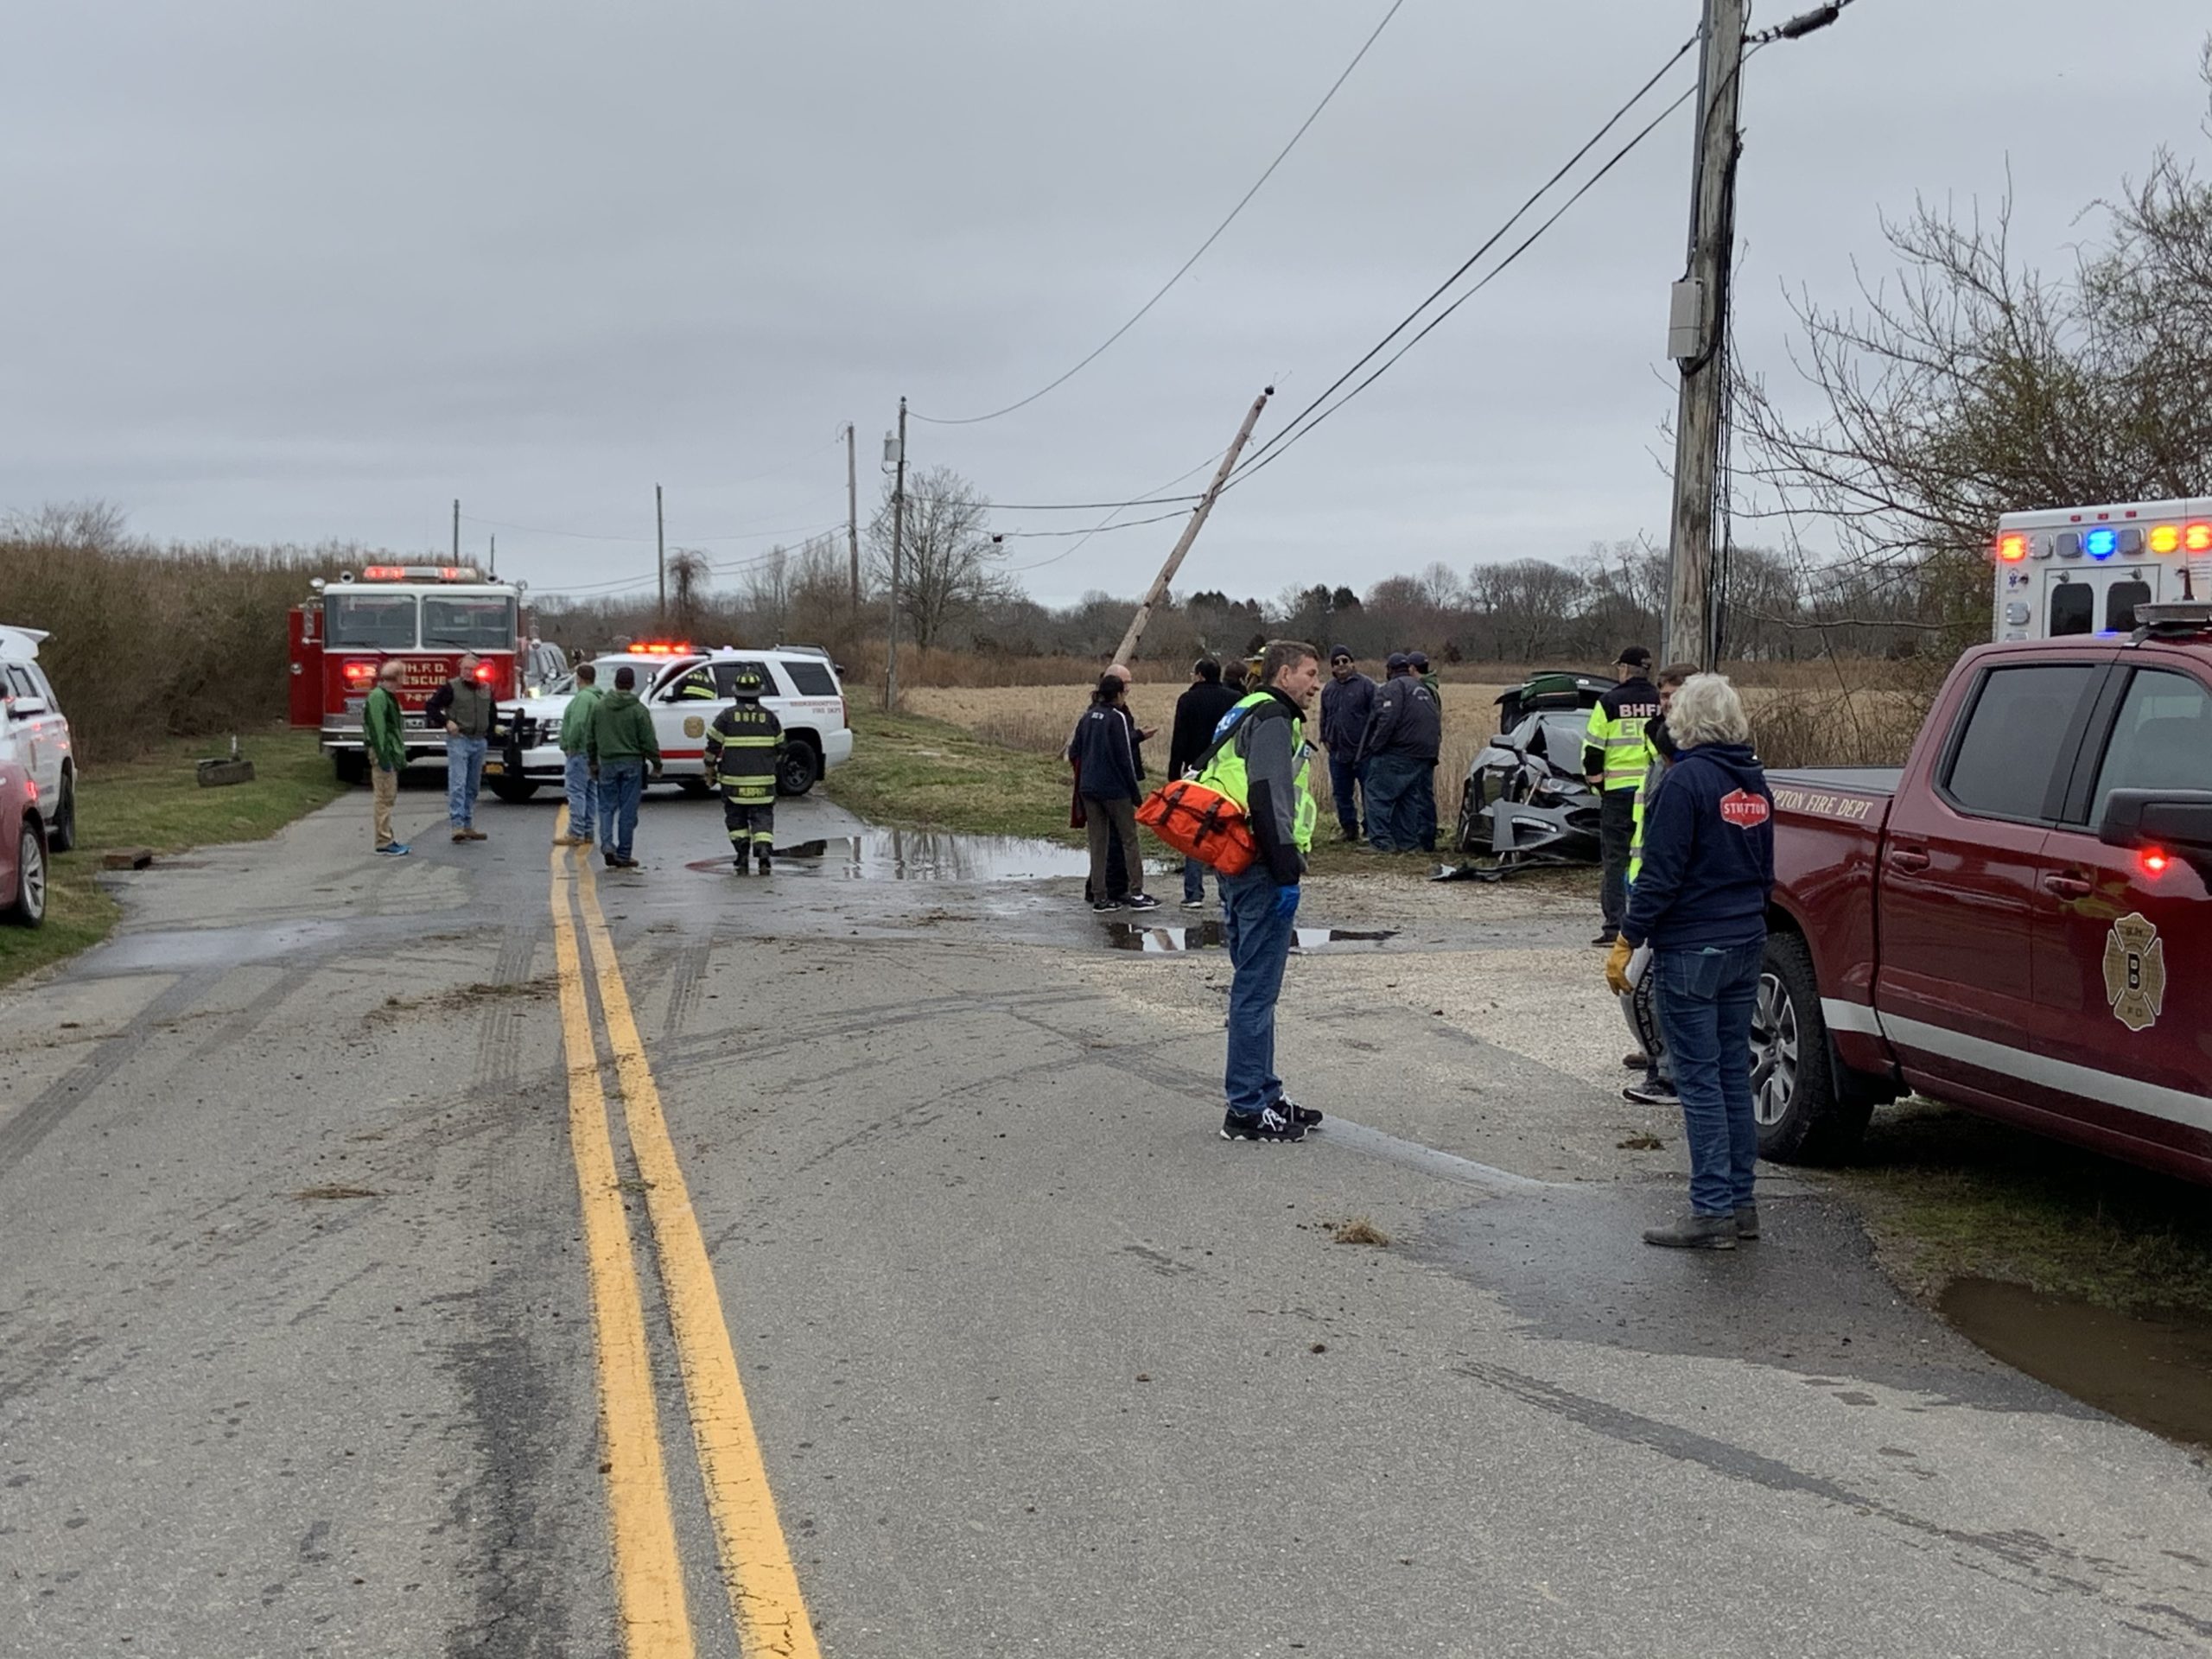 The Bridgehampton Fire Department and Southampton Town police were at the scene of a single-car accident on Highland Terrace in Bridgehampton on Thursday, March 19, at about 3:30 p.m. STEPHEN J.KOTZ